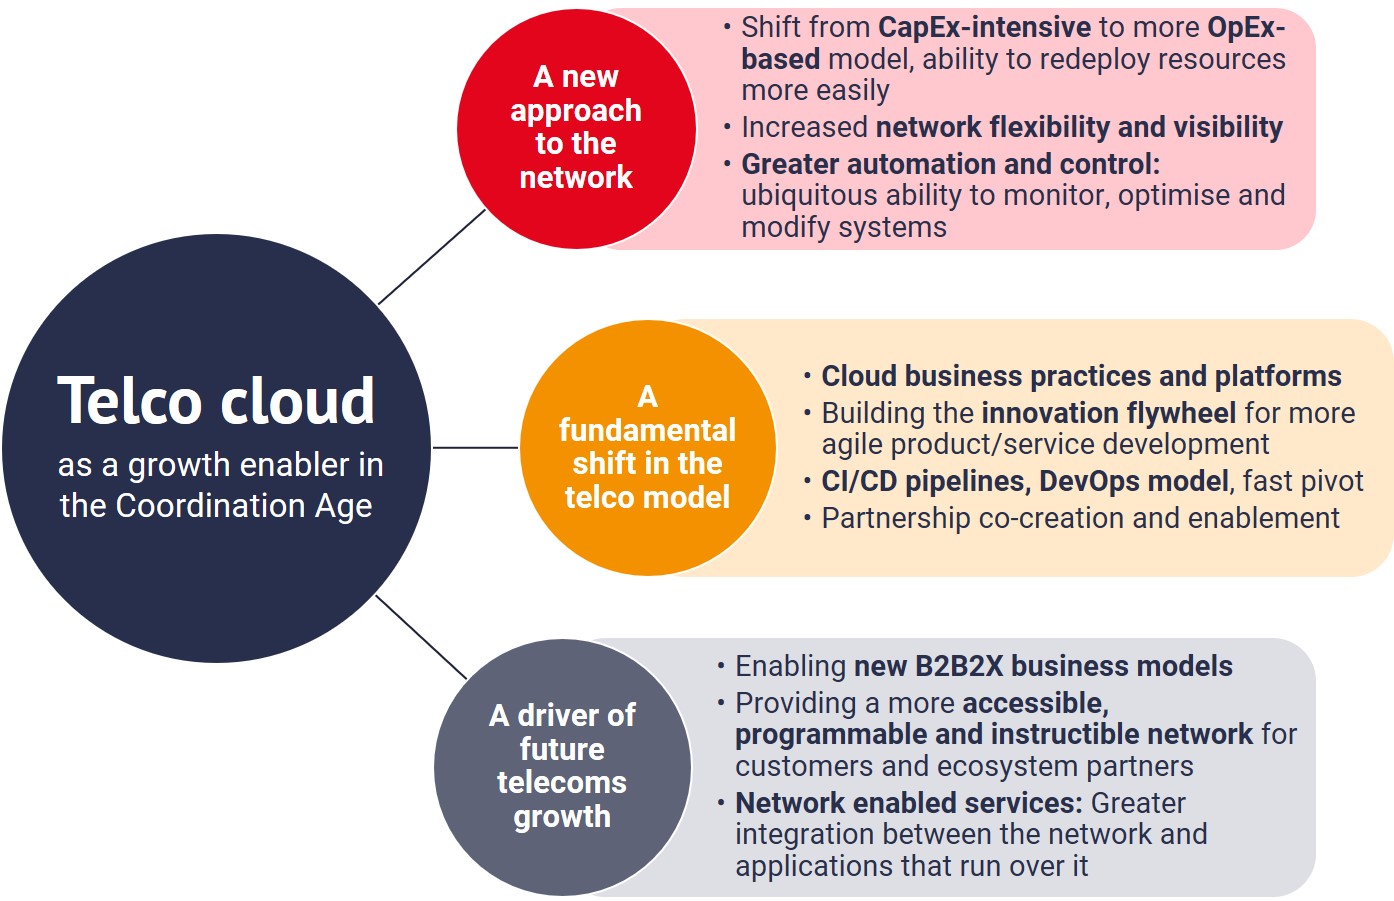 Telco cloud – a key growth enabler of the Coordination Age